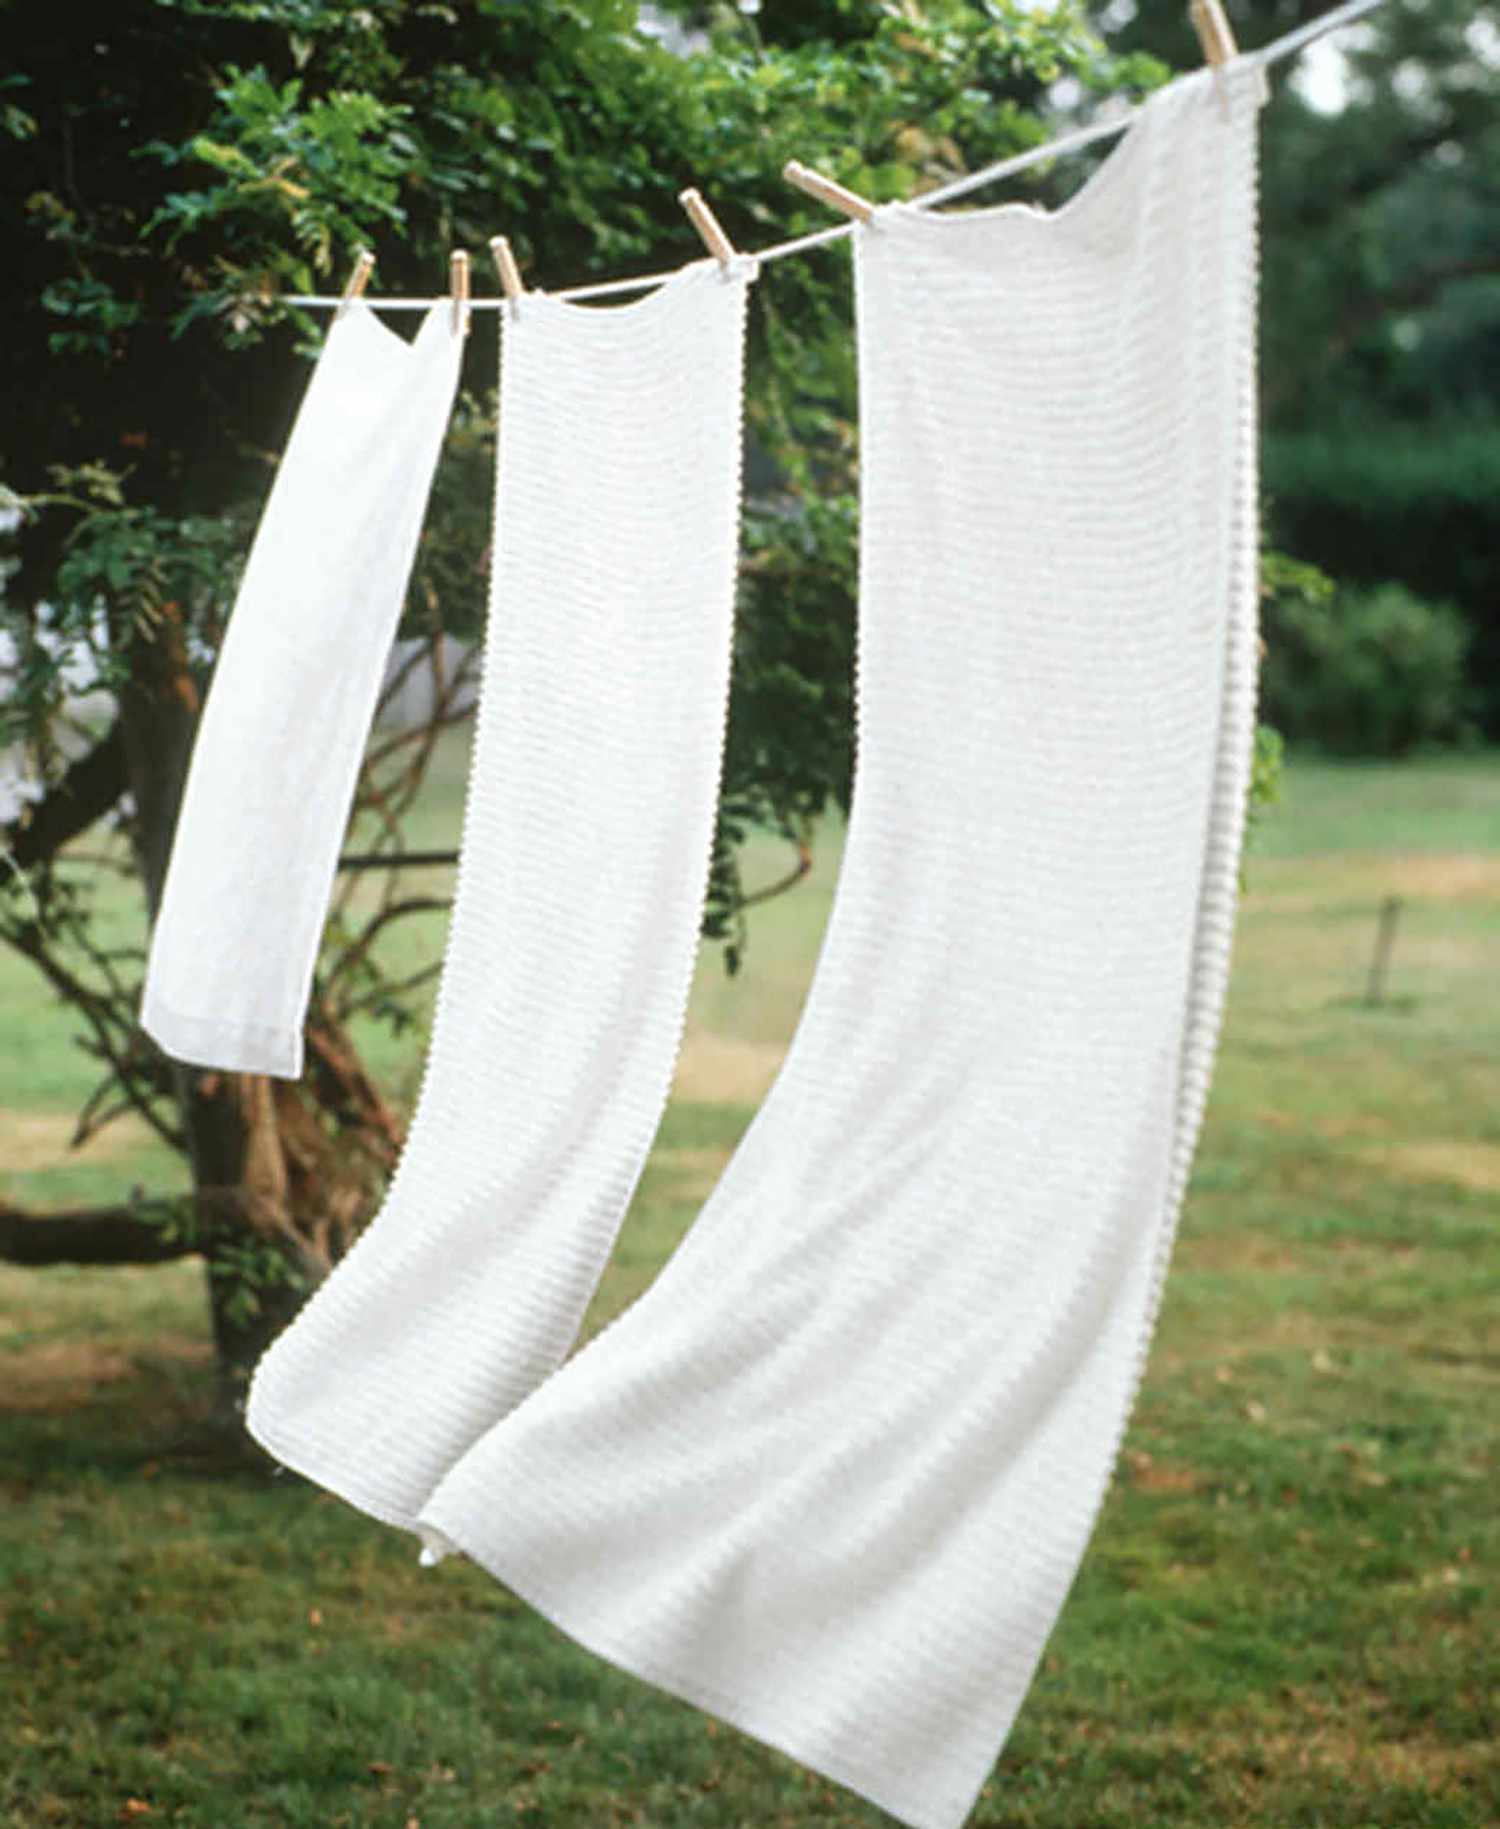 When I line-dry my laundry, the towels end up stiff. Are there any tricks to keeping them soft?